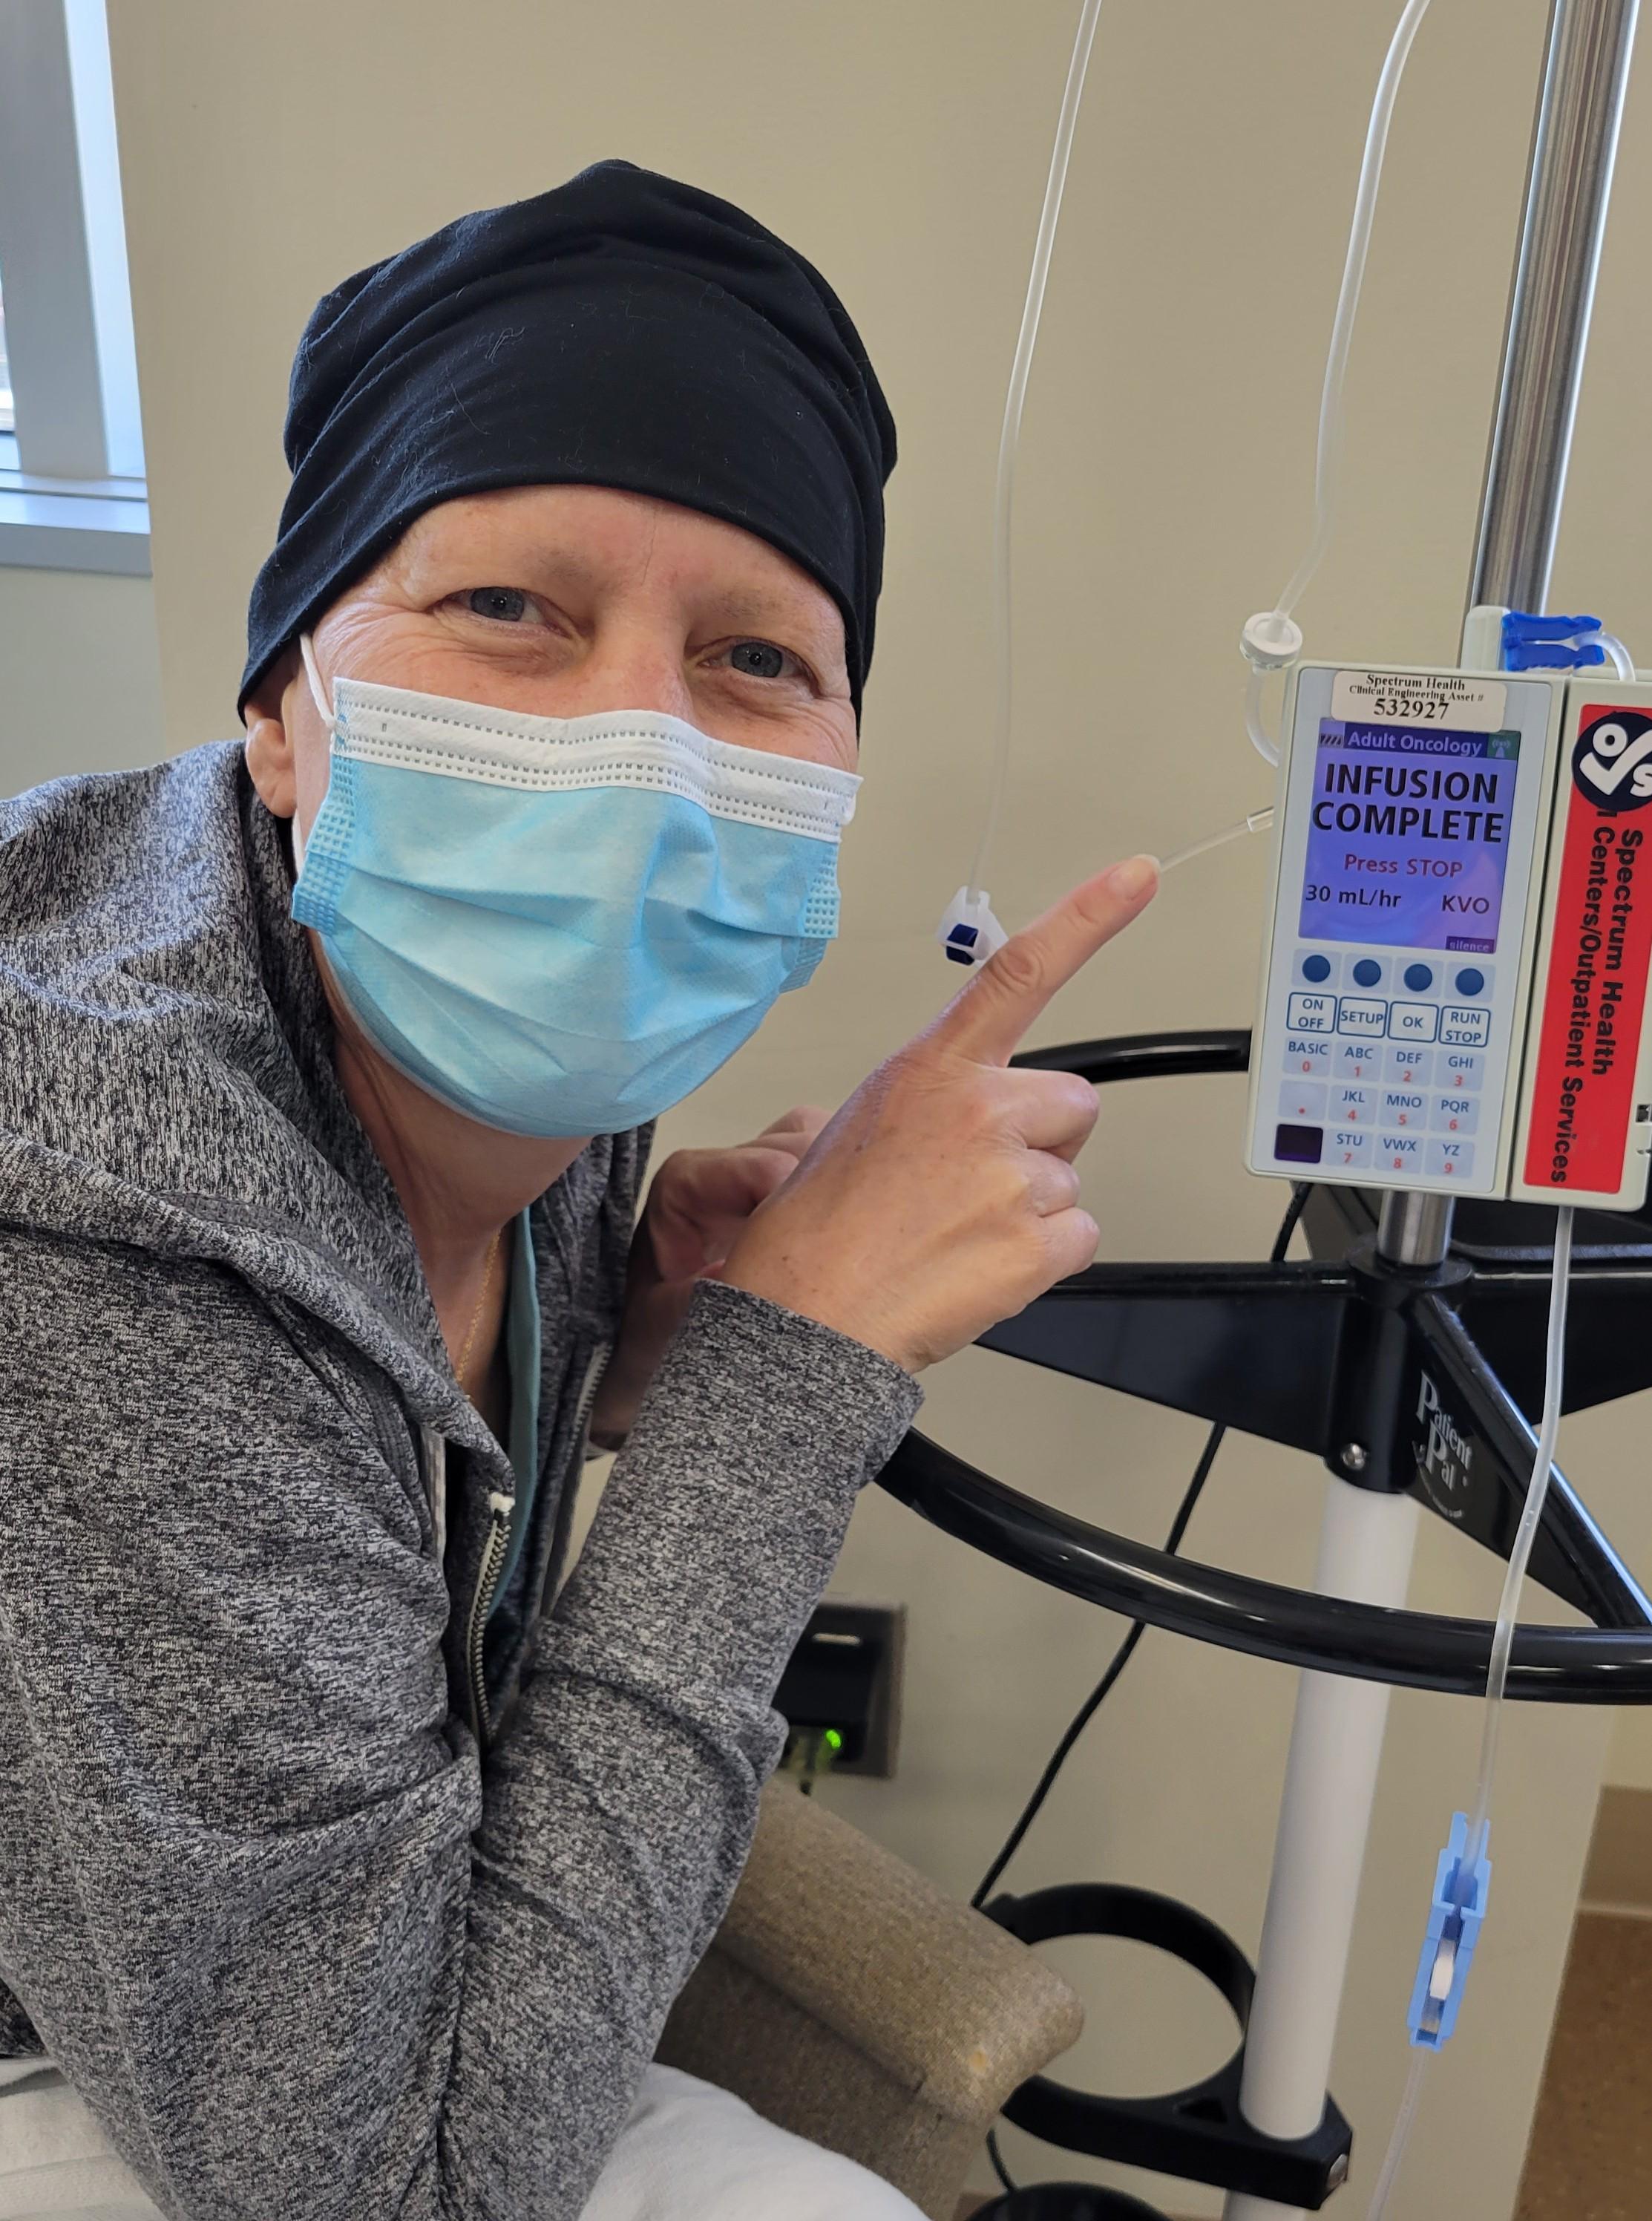 Amy Ritsema, co-owner of OnSite Wellness, takes a photo during her last round of chemotherapy